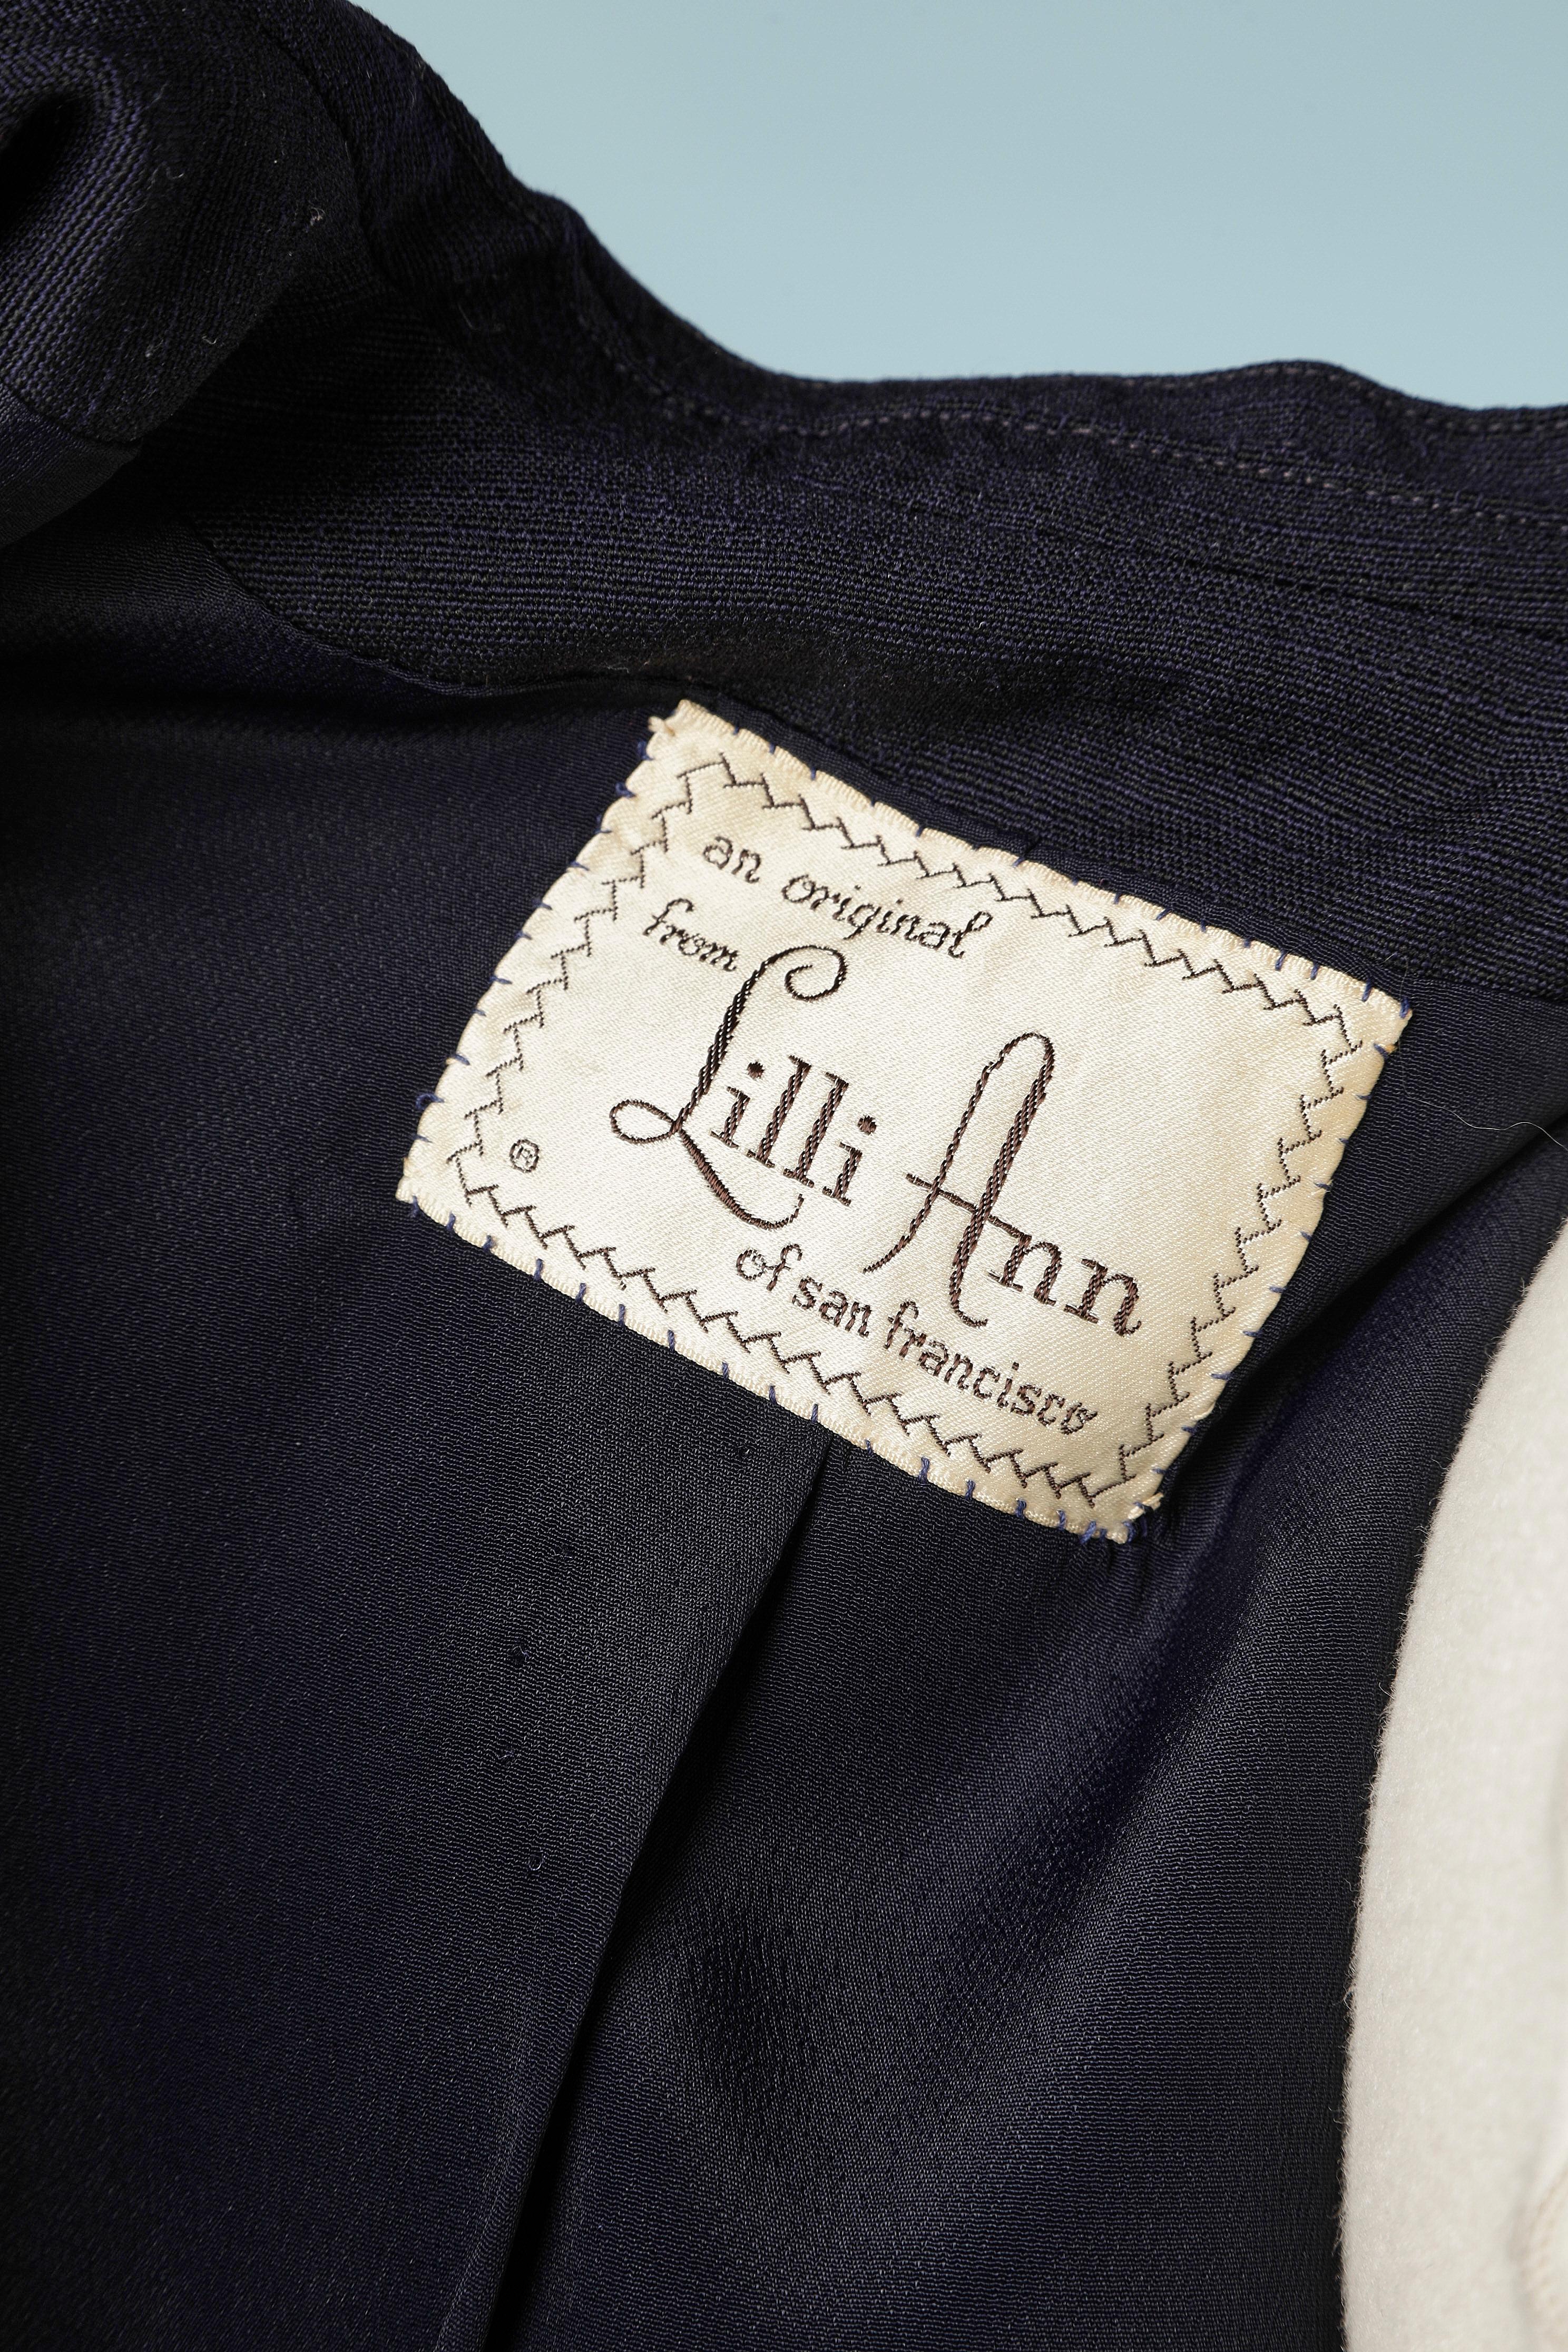 Navy blue wool skirt suit with top-stitching Lilli Ann Circa 1940 For Sale 3